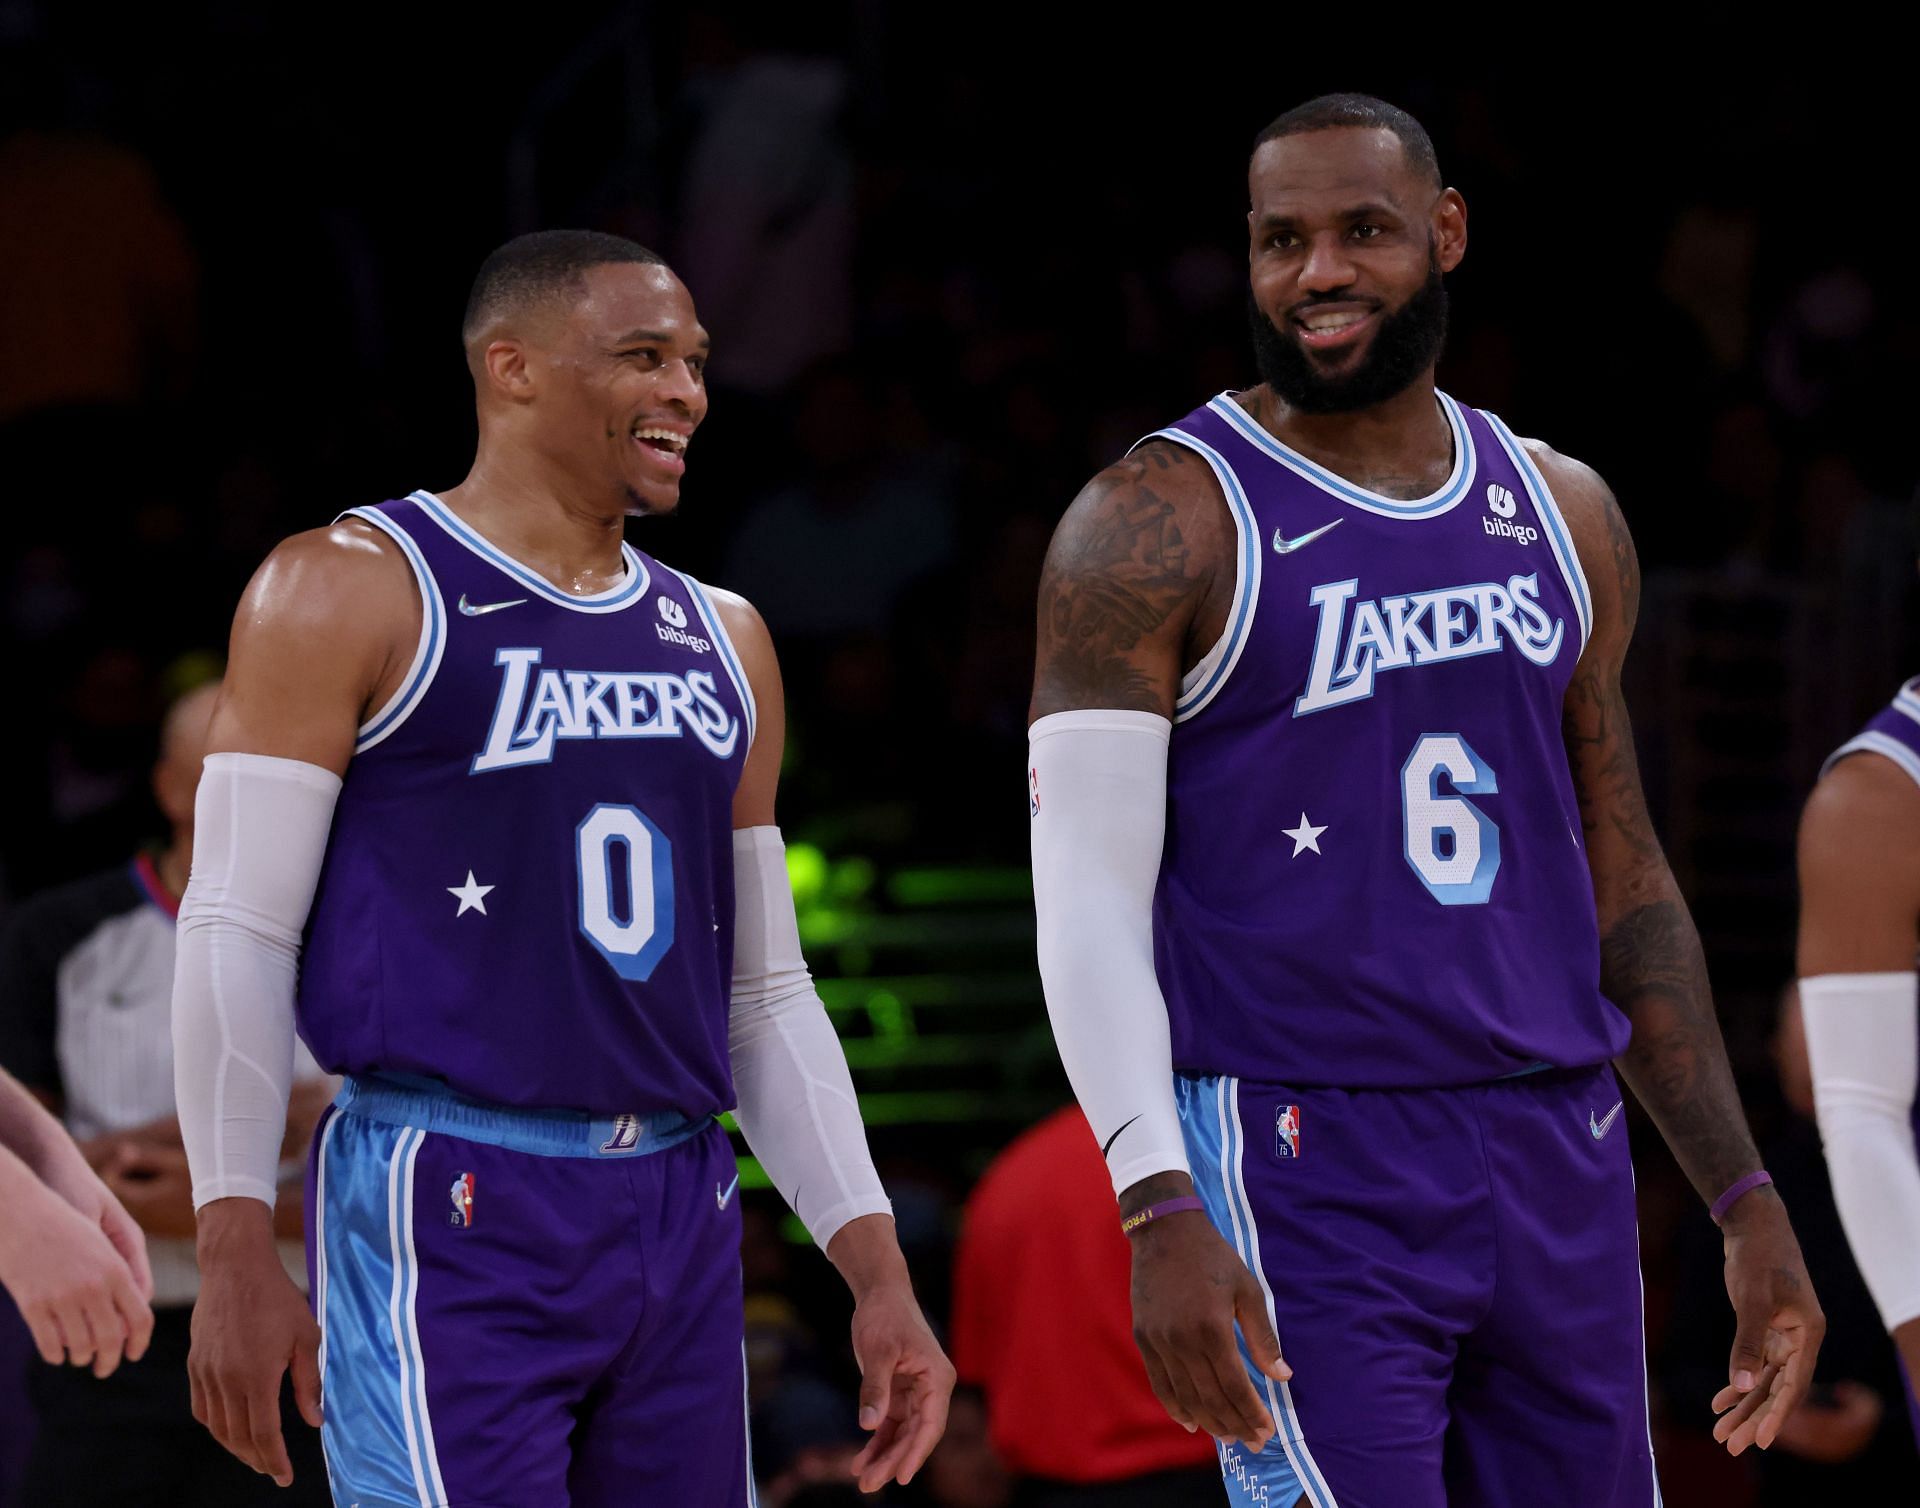 Russell Westbrook (0) and LeBron James (6) of the LA Lakers